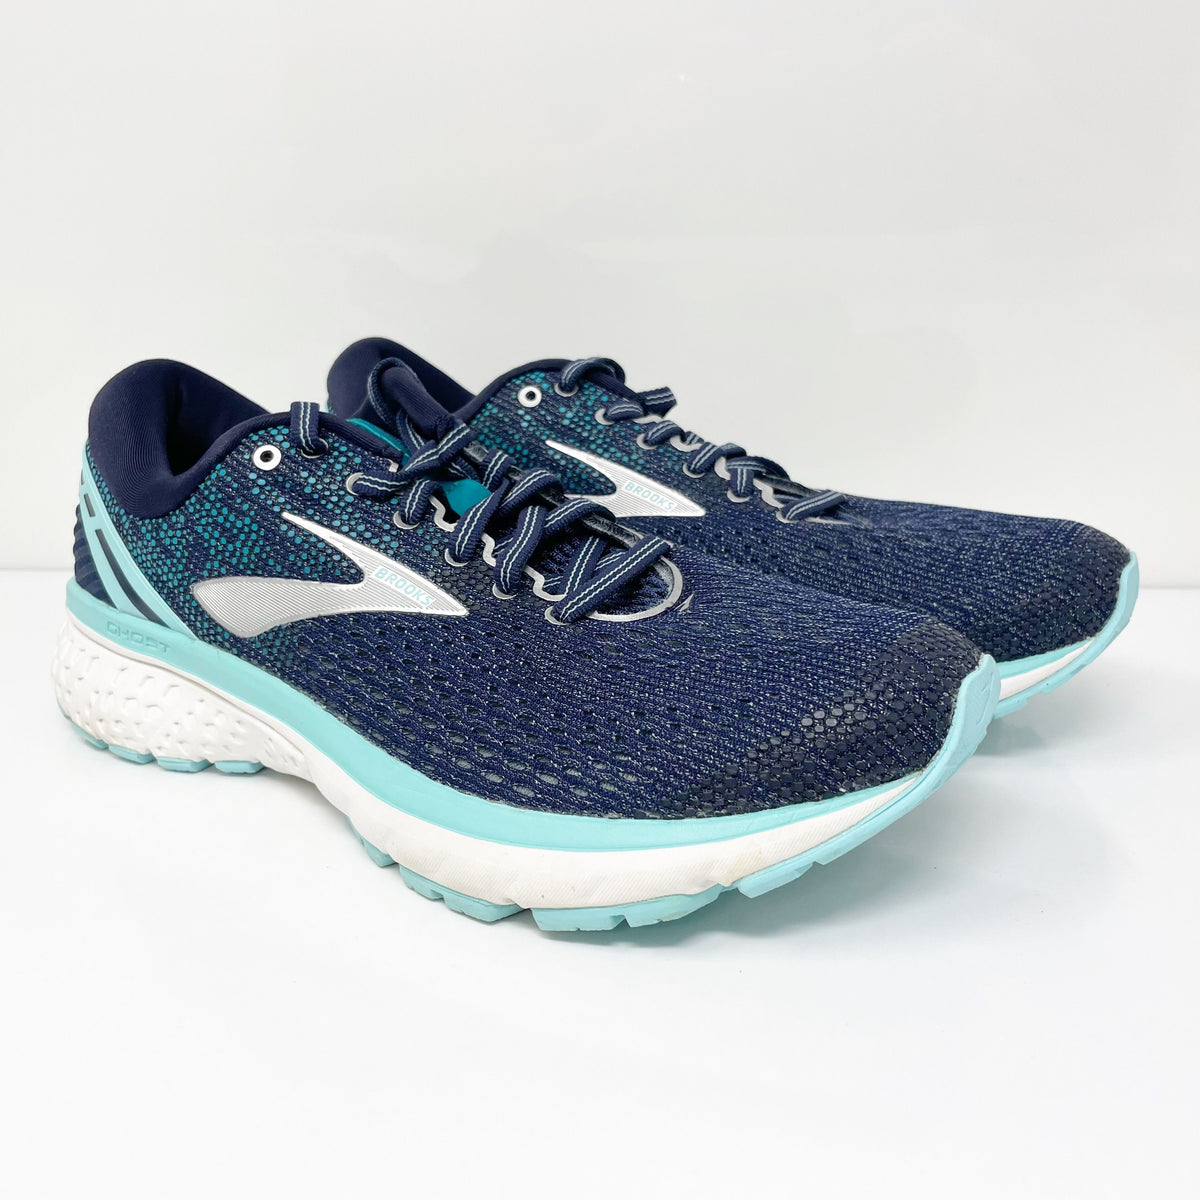 Brooks Ghost 13 Running Shoes Sneakers Training Athletic Women's Size 11 B  for Sale in West Linn, OR - OfferUp